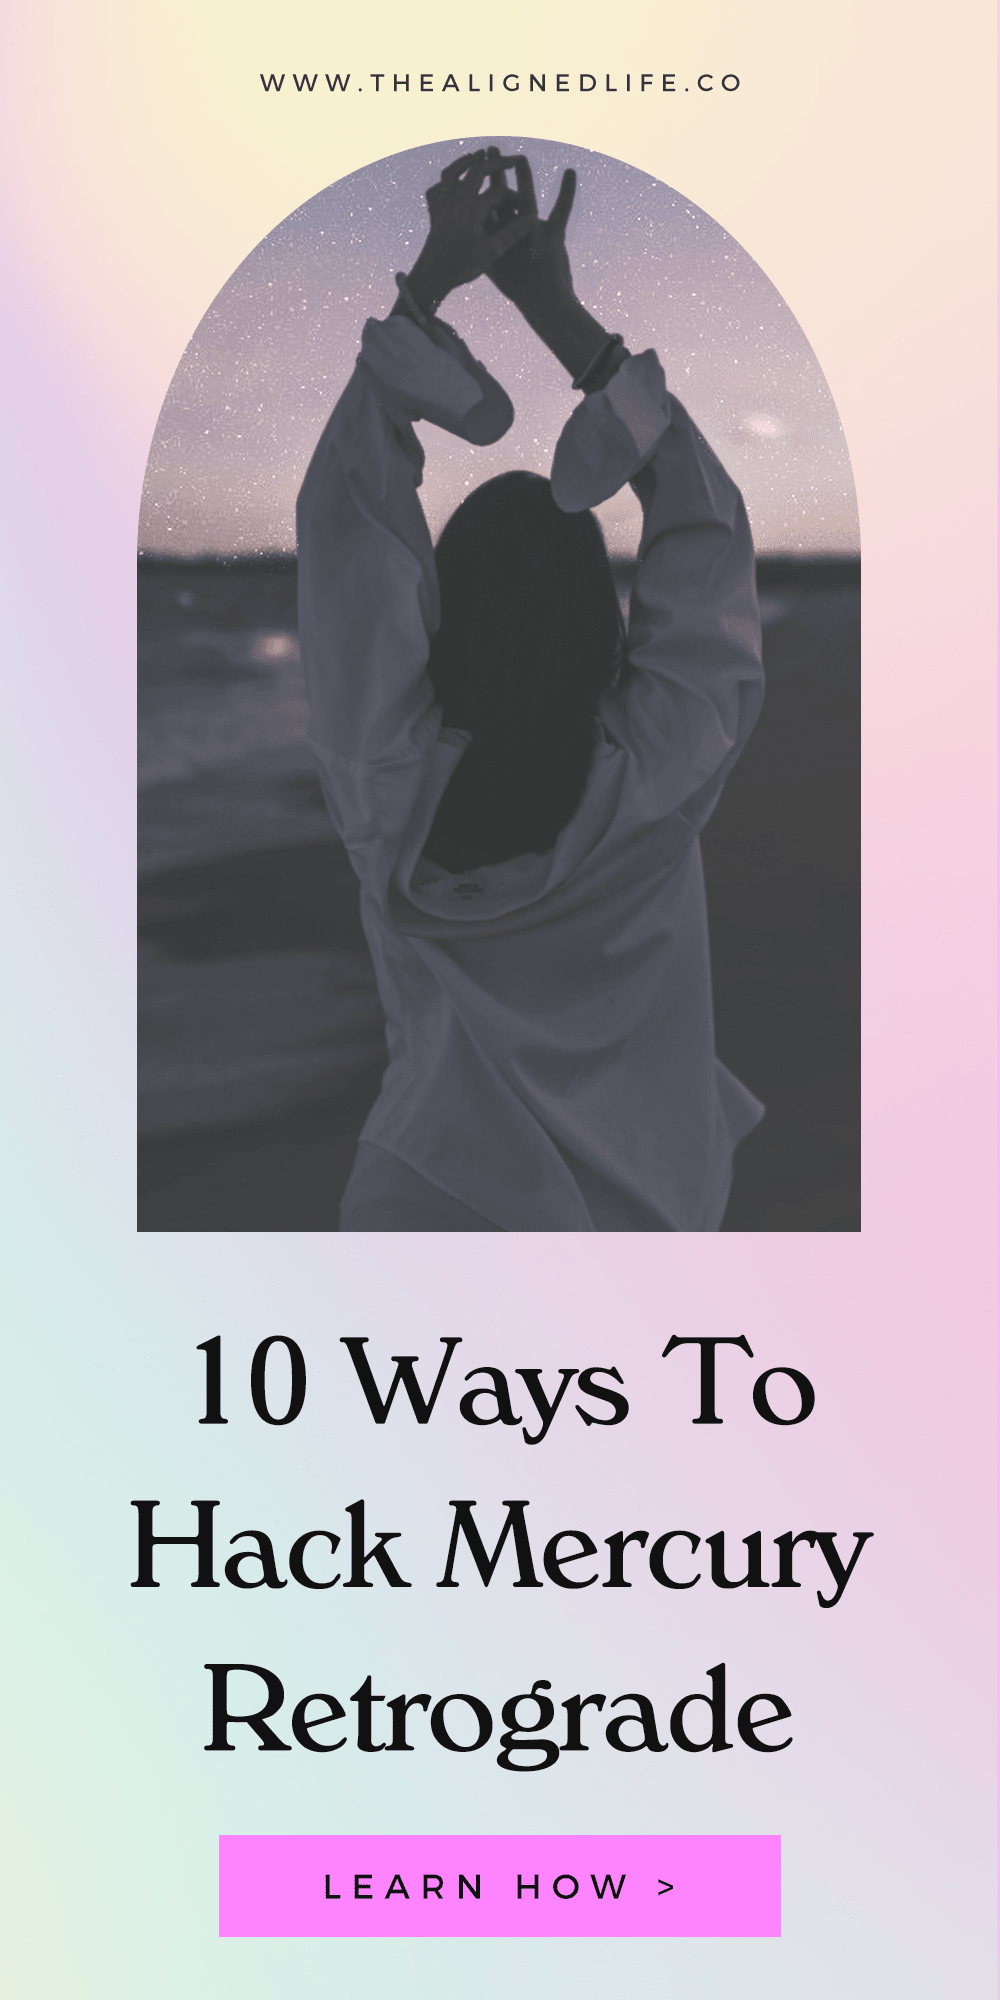 woman dancing in front of starry sky with text 10 Ways To Hack Mercury Retrograde